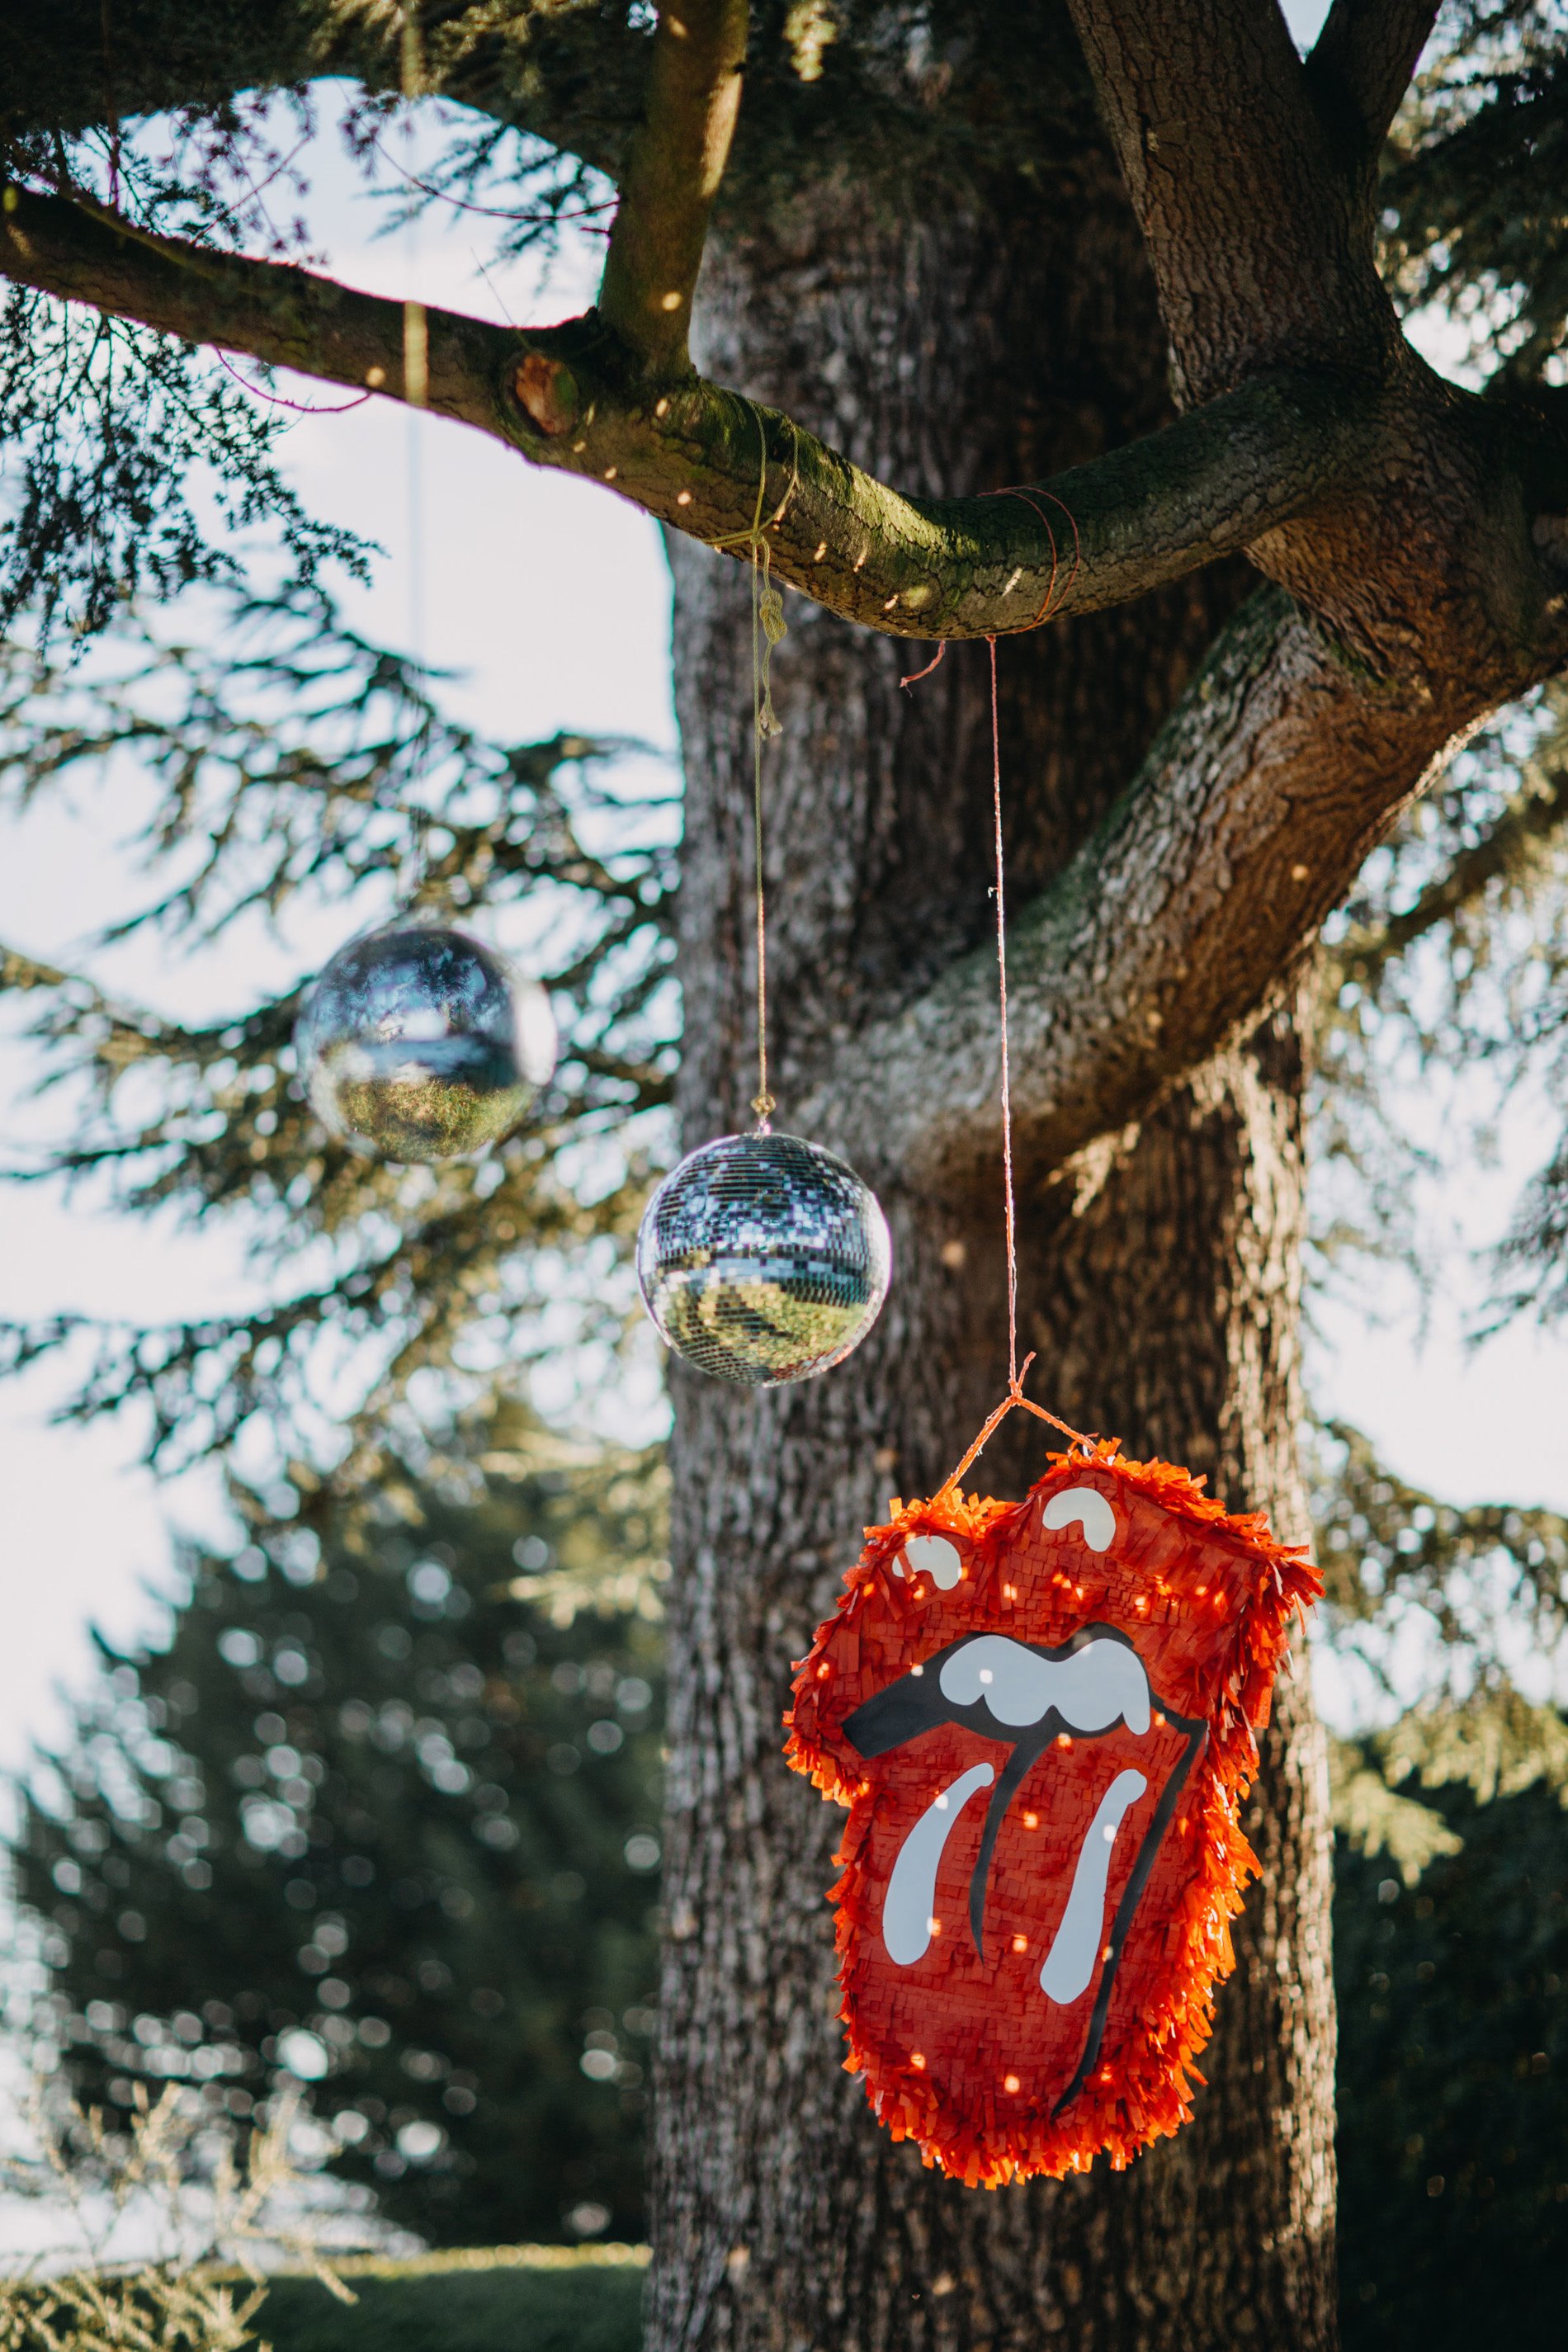 Rolling stones hot lips pinata and disco ball in tree for a rock n roll wedding at elmore court